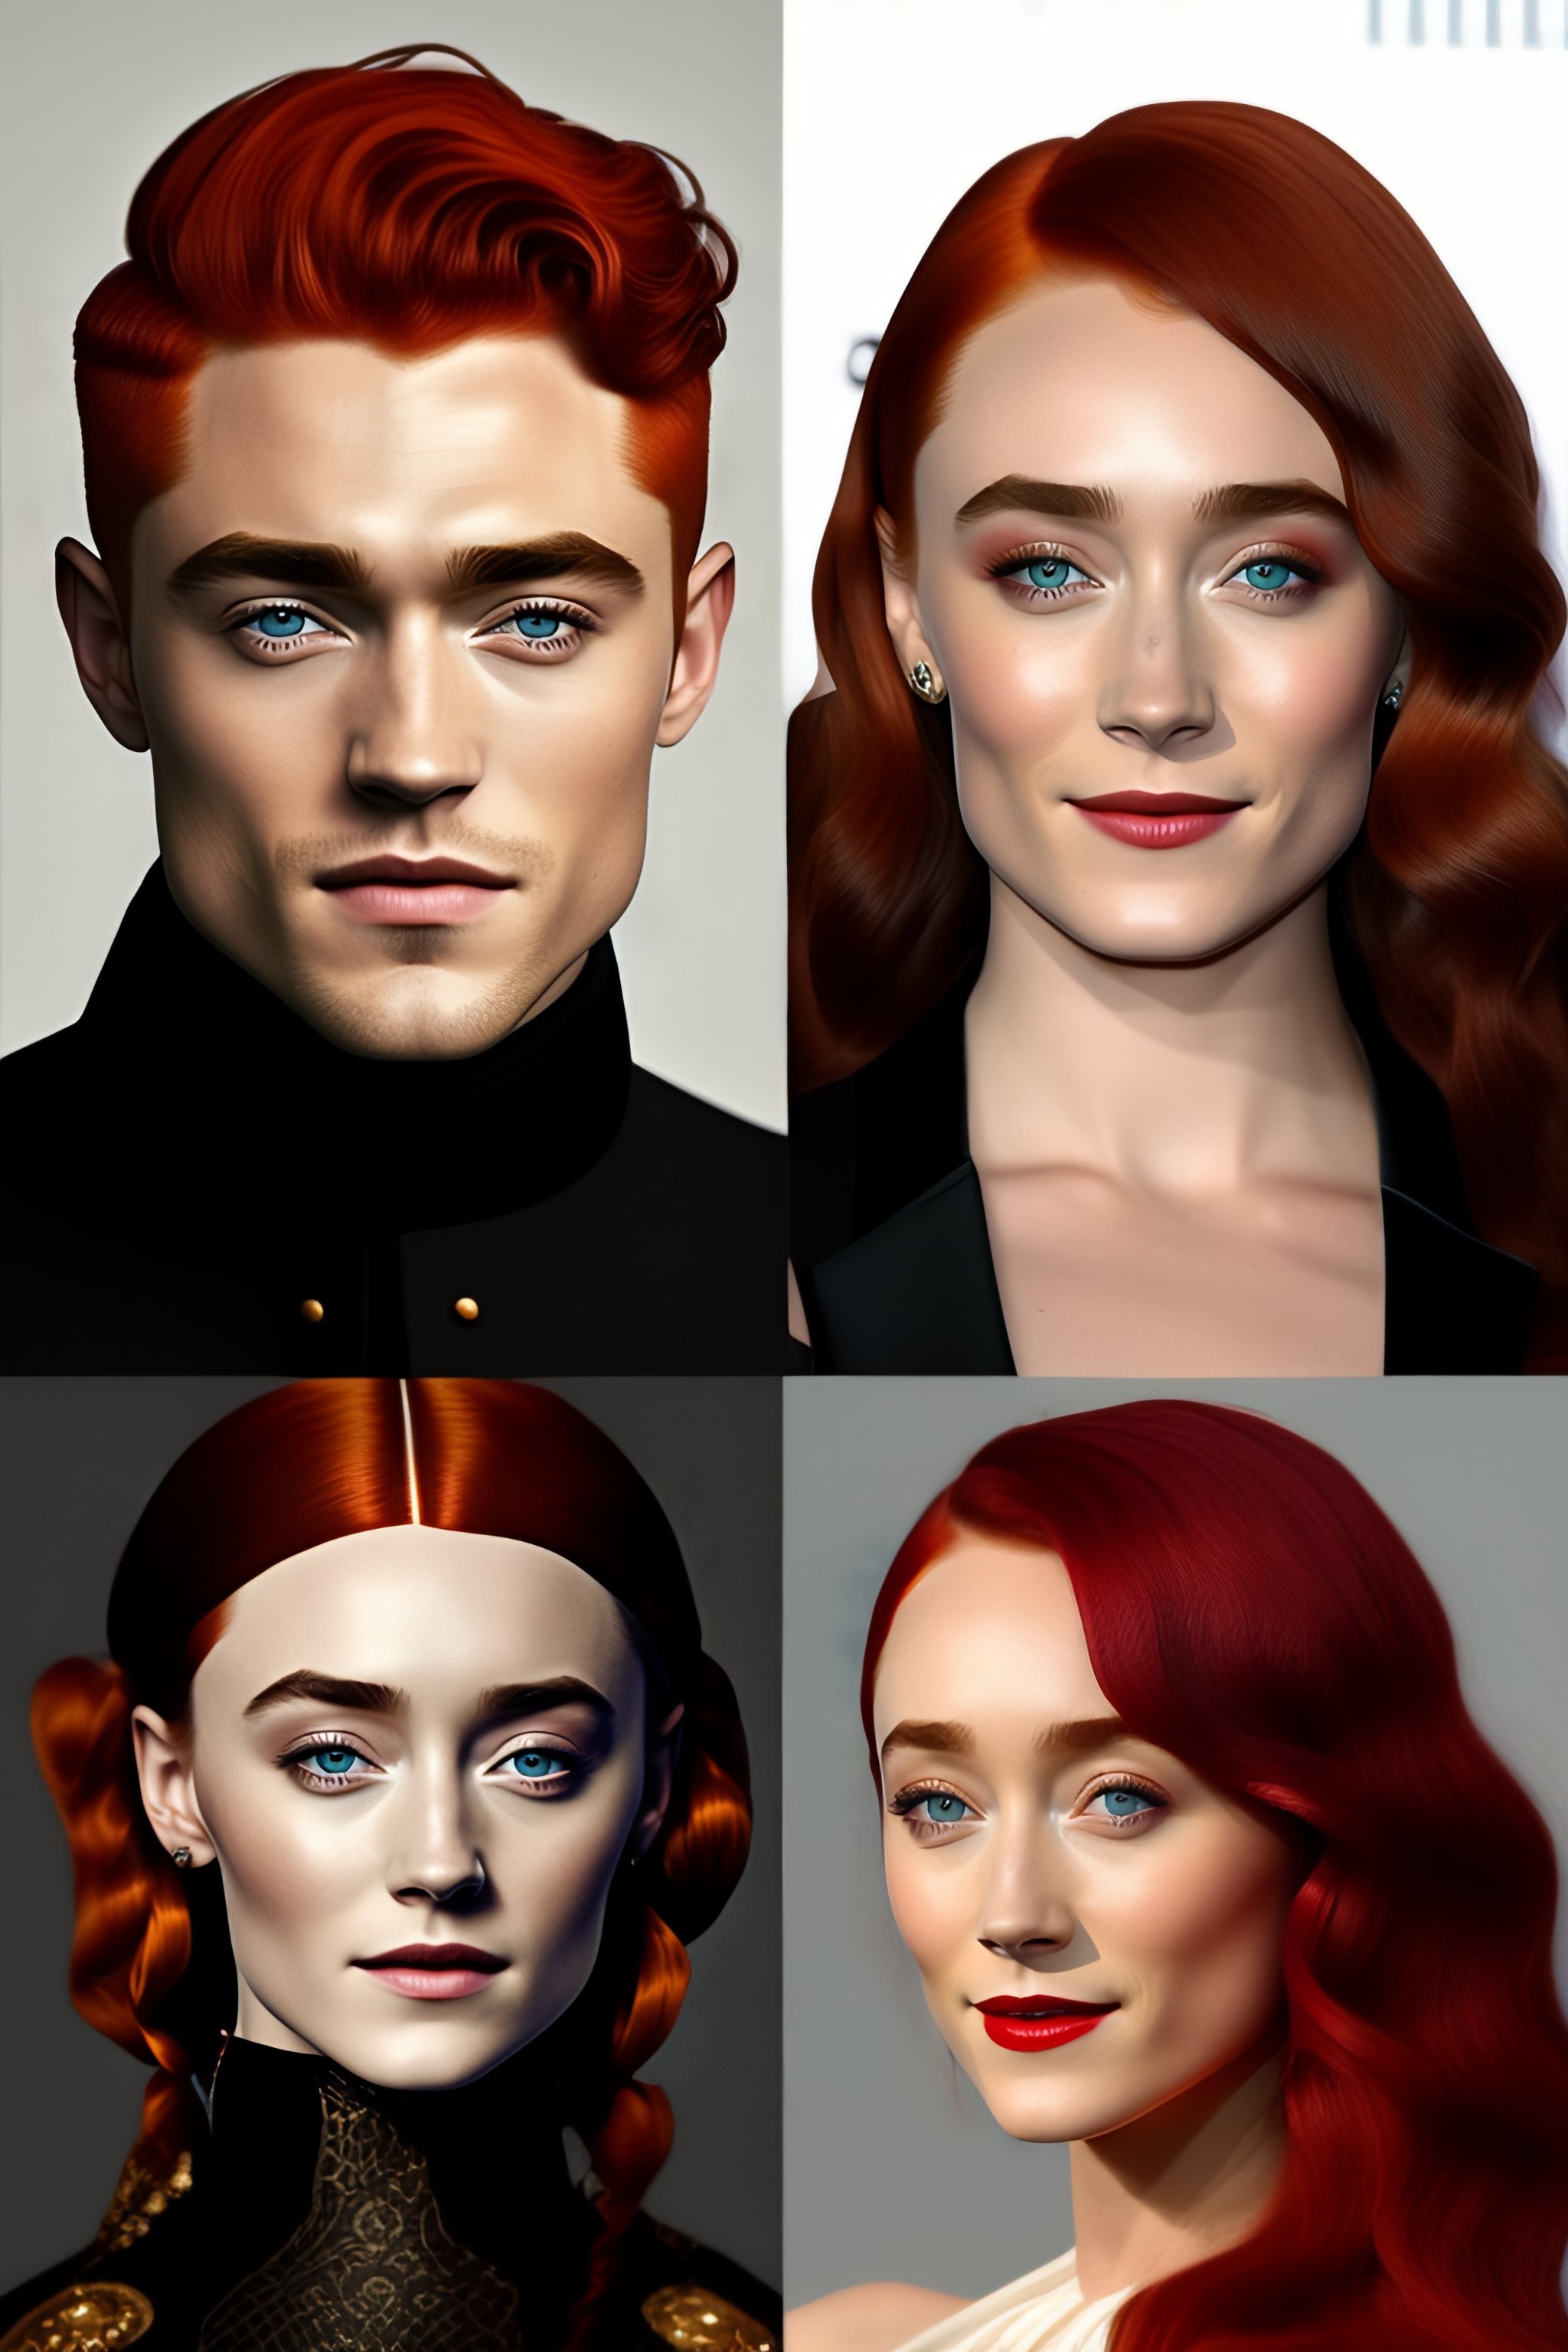 Lexica - Saoirse Ronan with red hair together with Robert Pattinson with  dark hair in medieval style, art